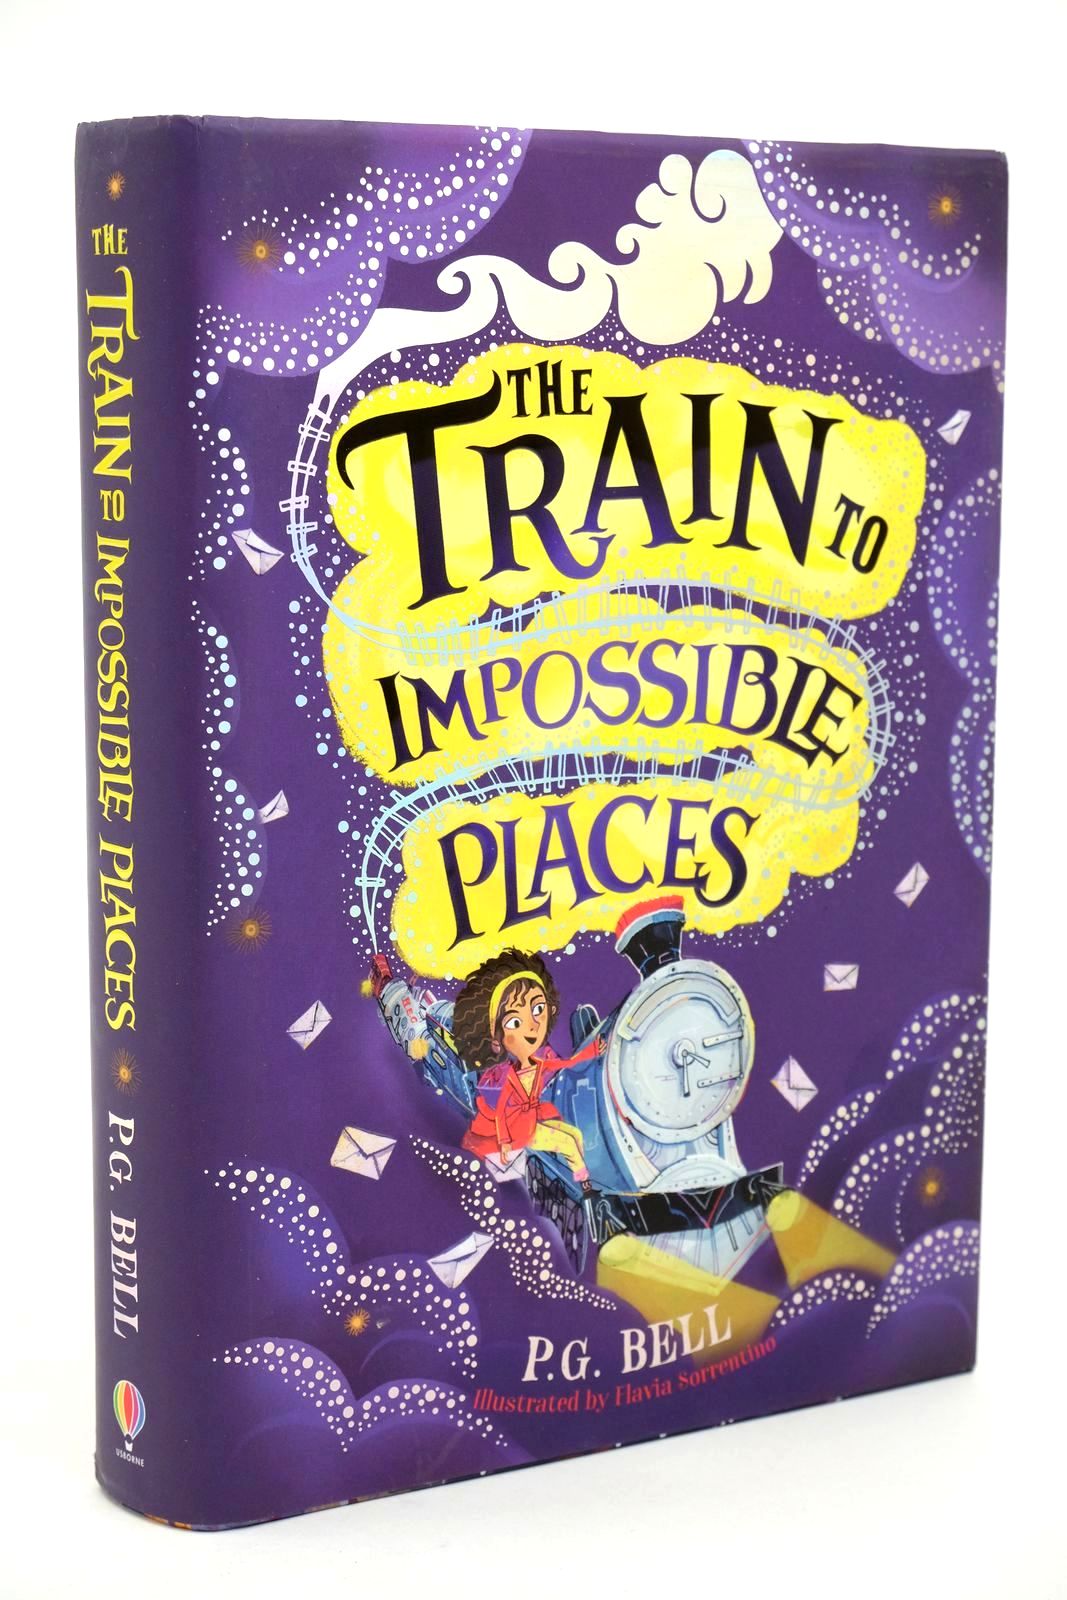 Photo of THE TRAIN TO IMPOSSIBLE PLACES written by Bell, P. G. illustrated by Sorrentino, Flavia published by Usborne Publishing Ltd. (STOCK CODE: 1323011)  for sale by Stella & Rose's Books